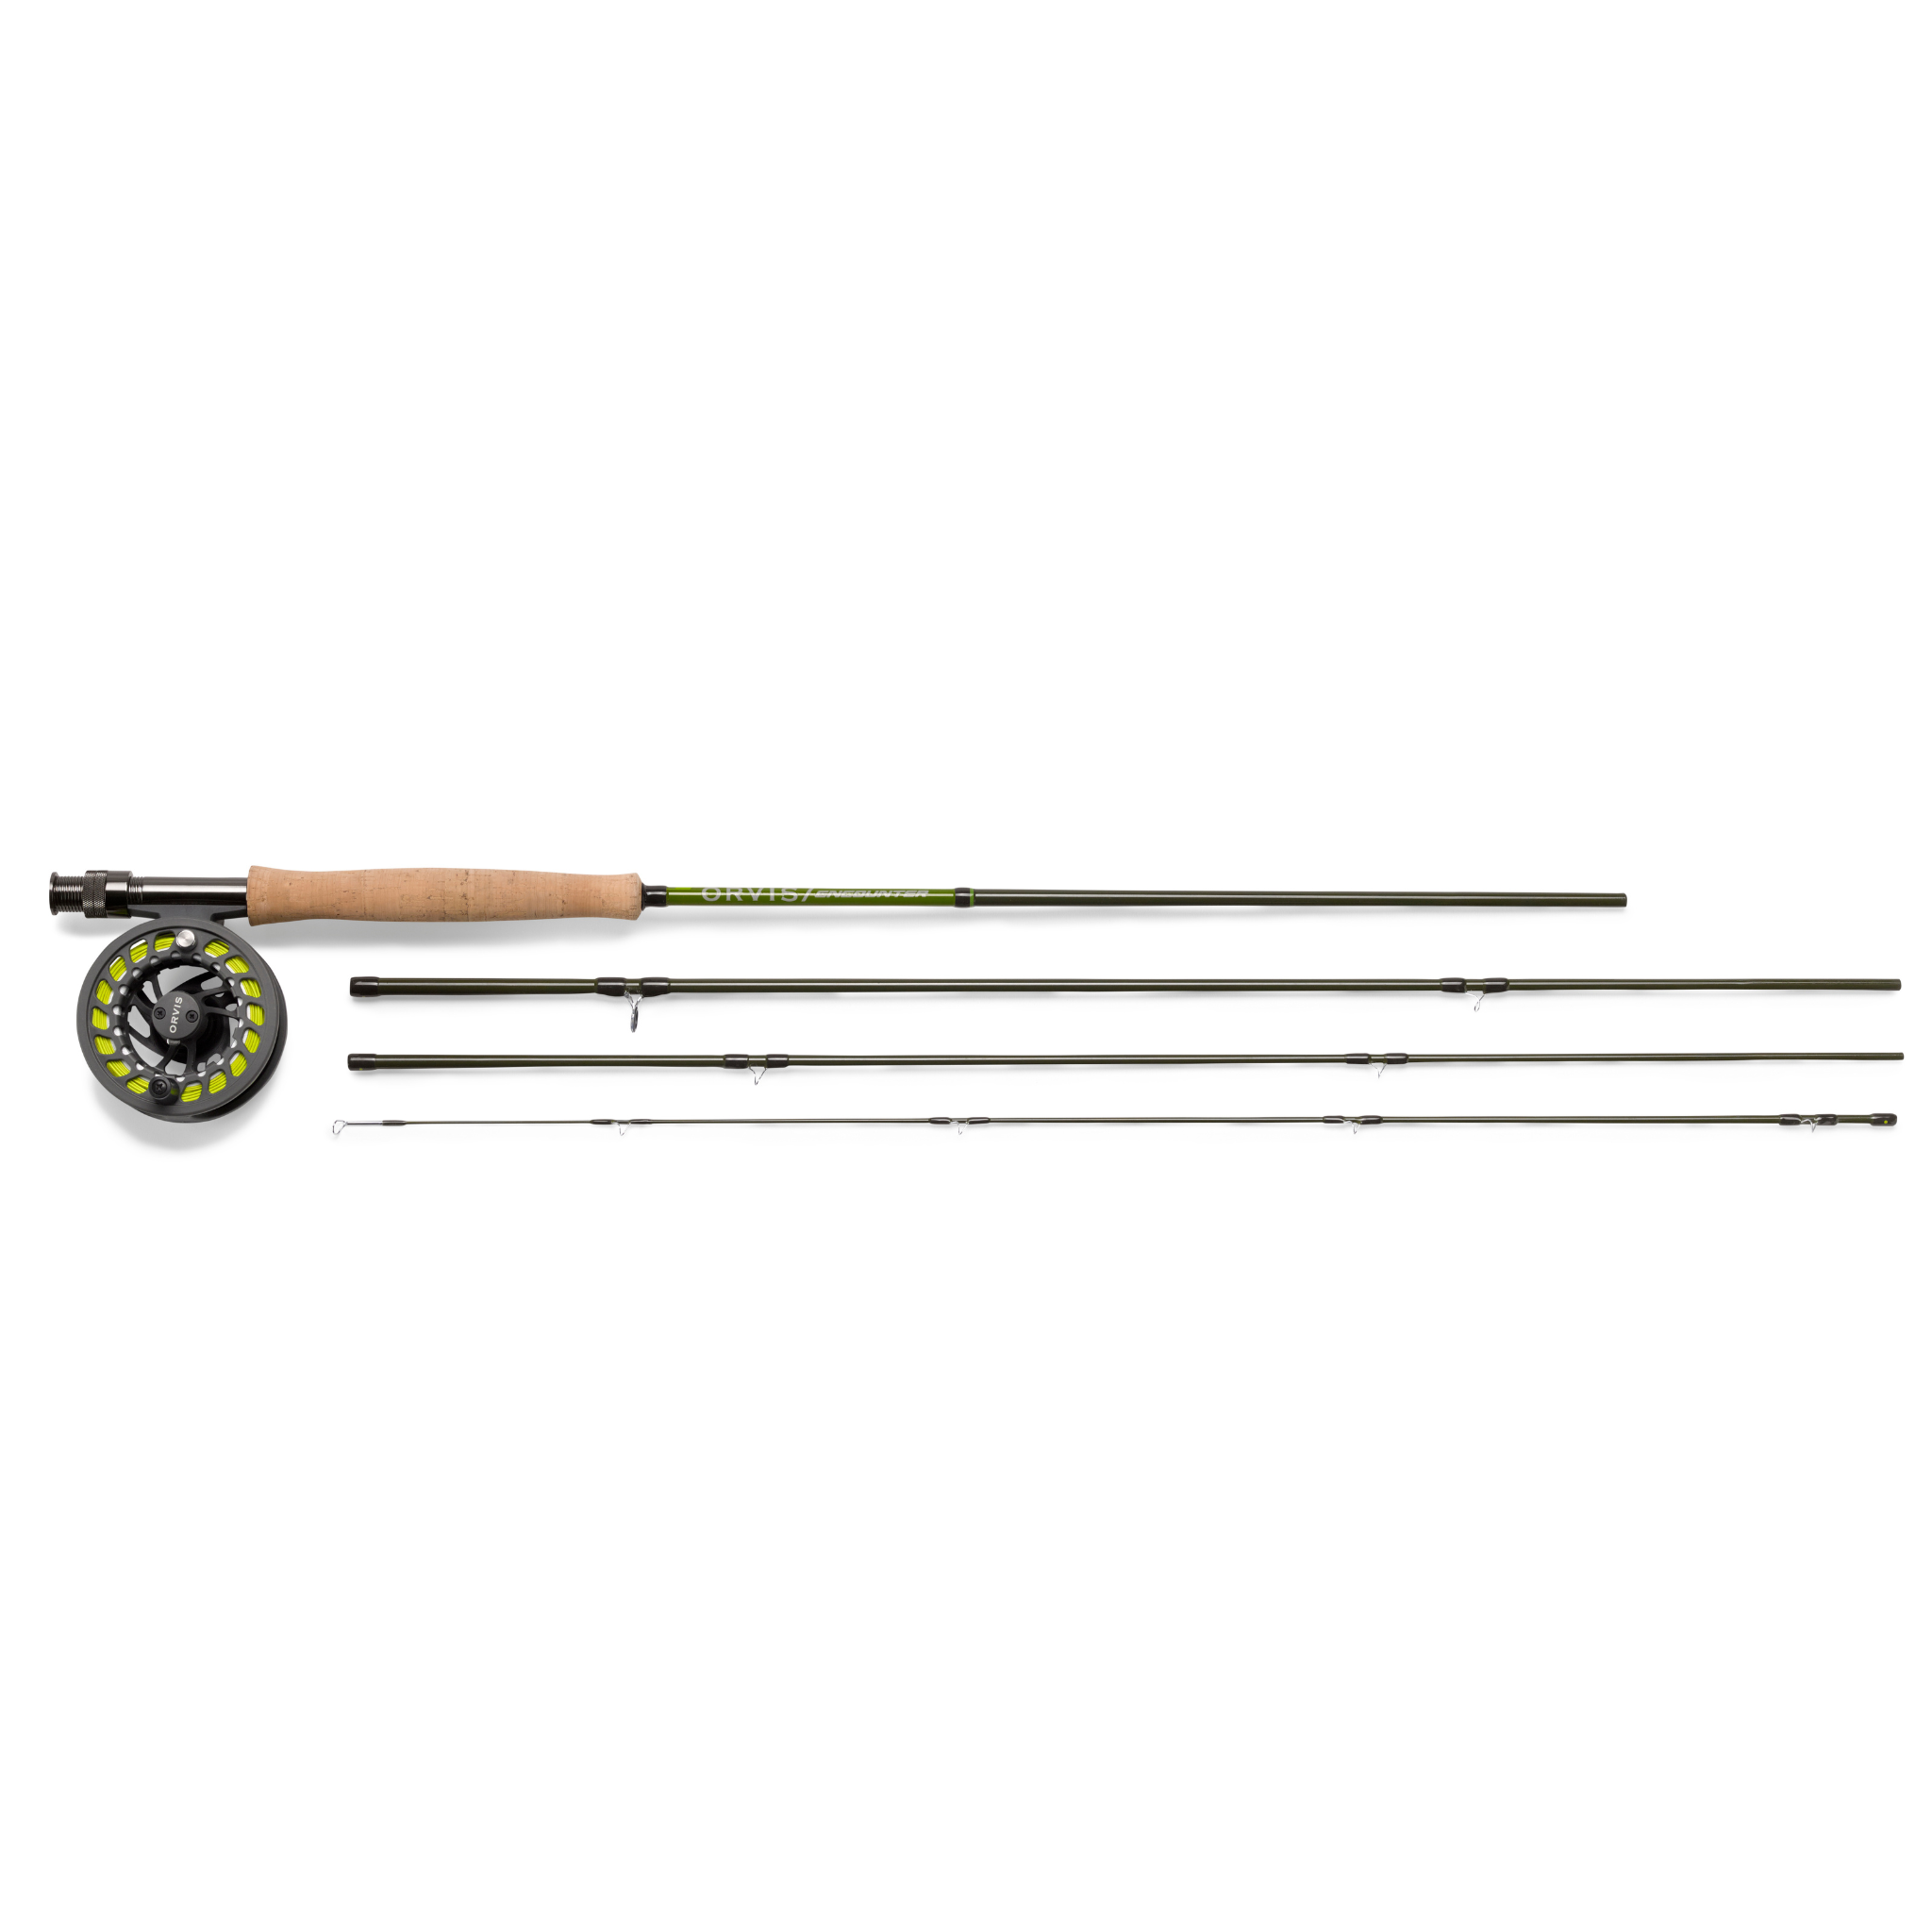 Orvis Encounter 9' - 5 Weight - 4 Piece Outfit